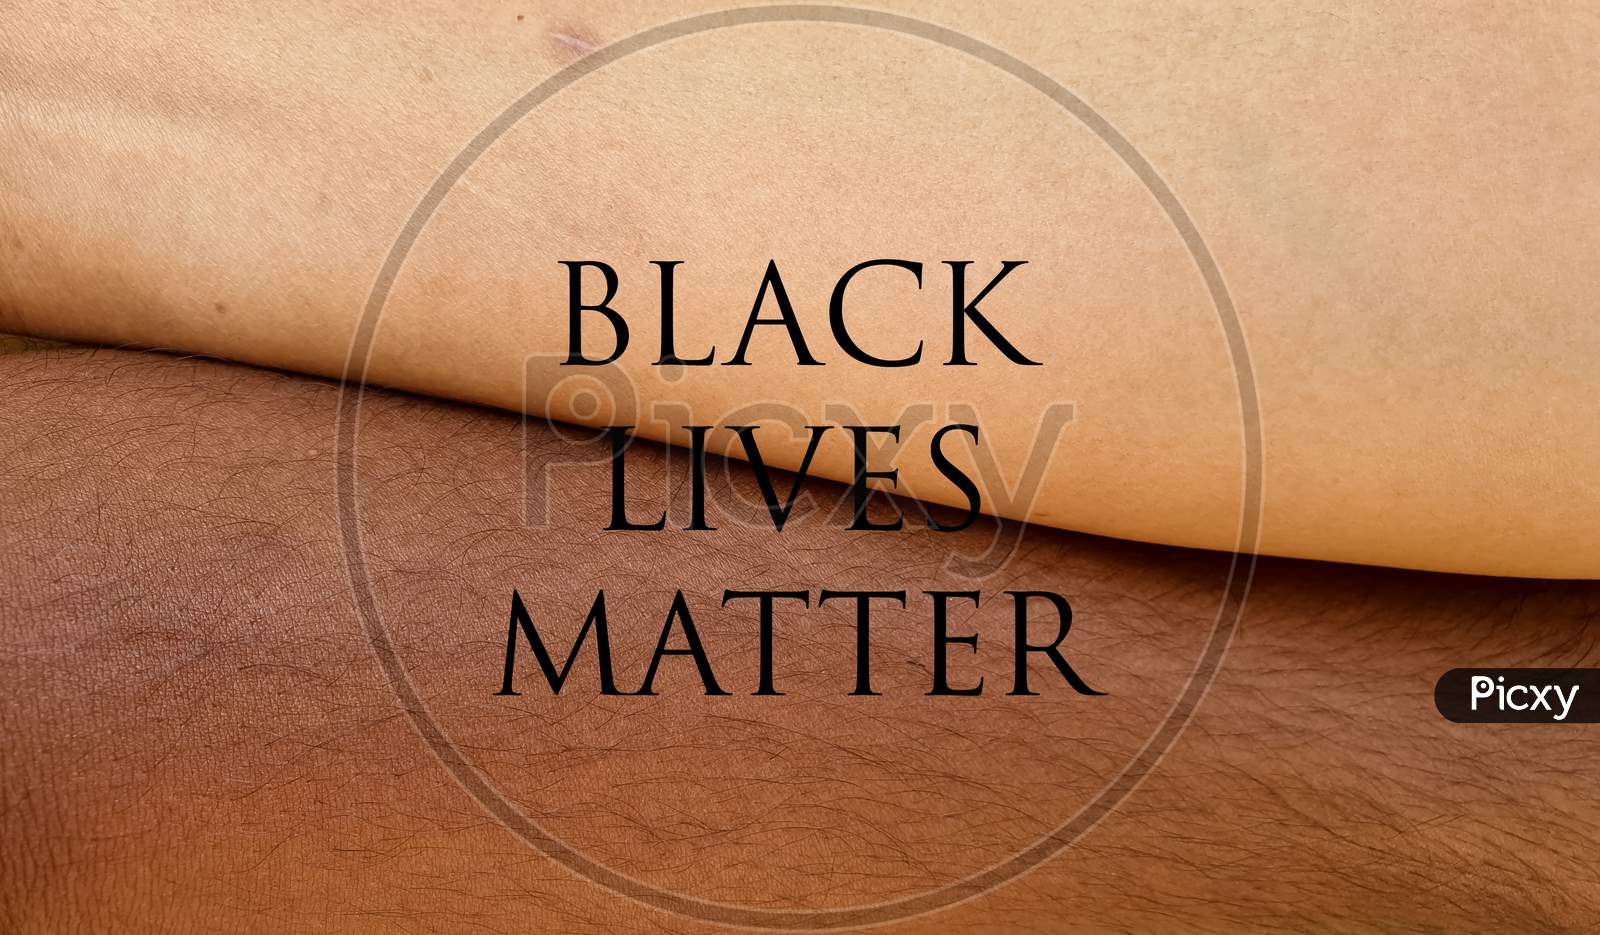 Black Lives Matter based stock photo of a black hand of a male and a fair hand of a female